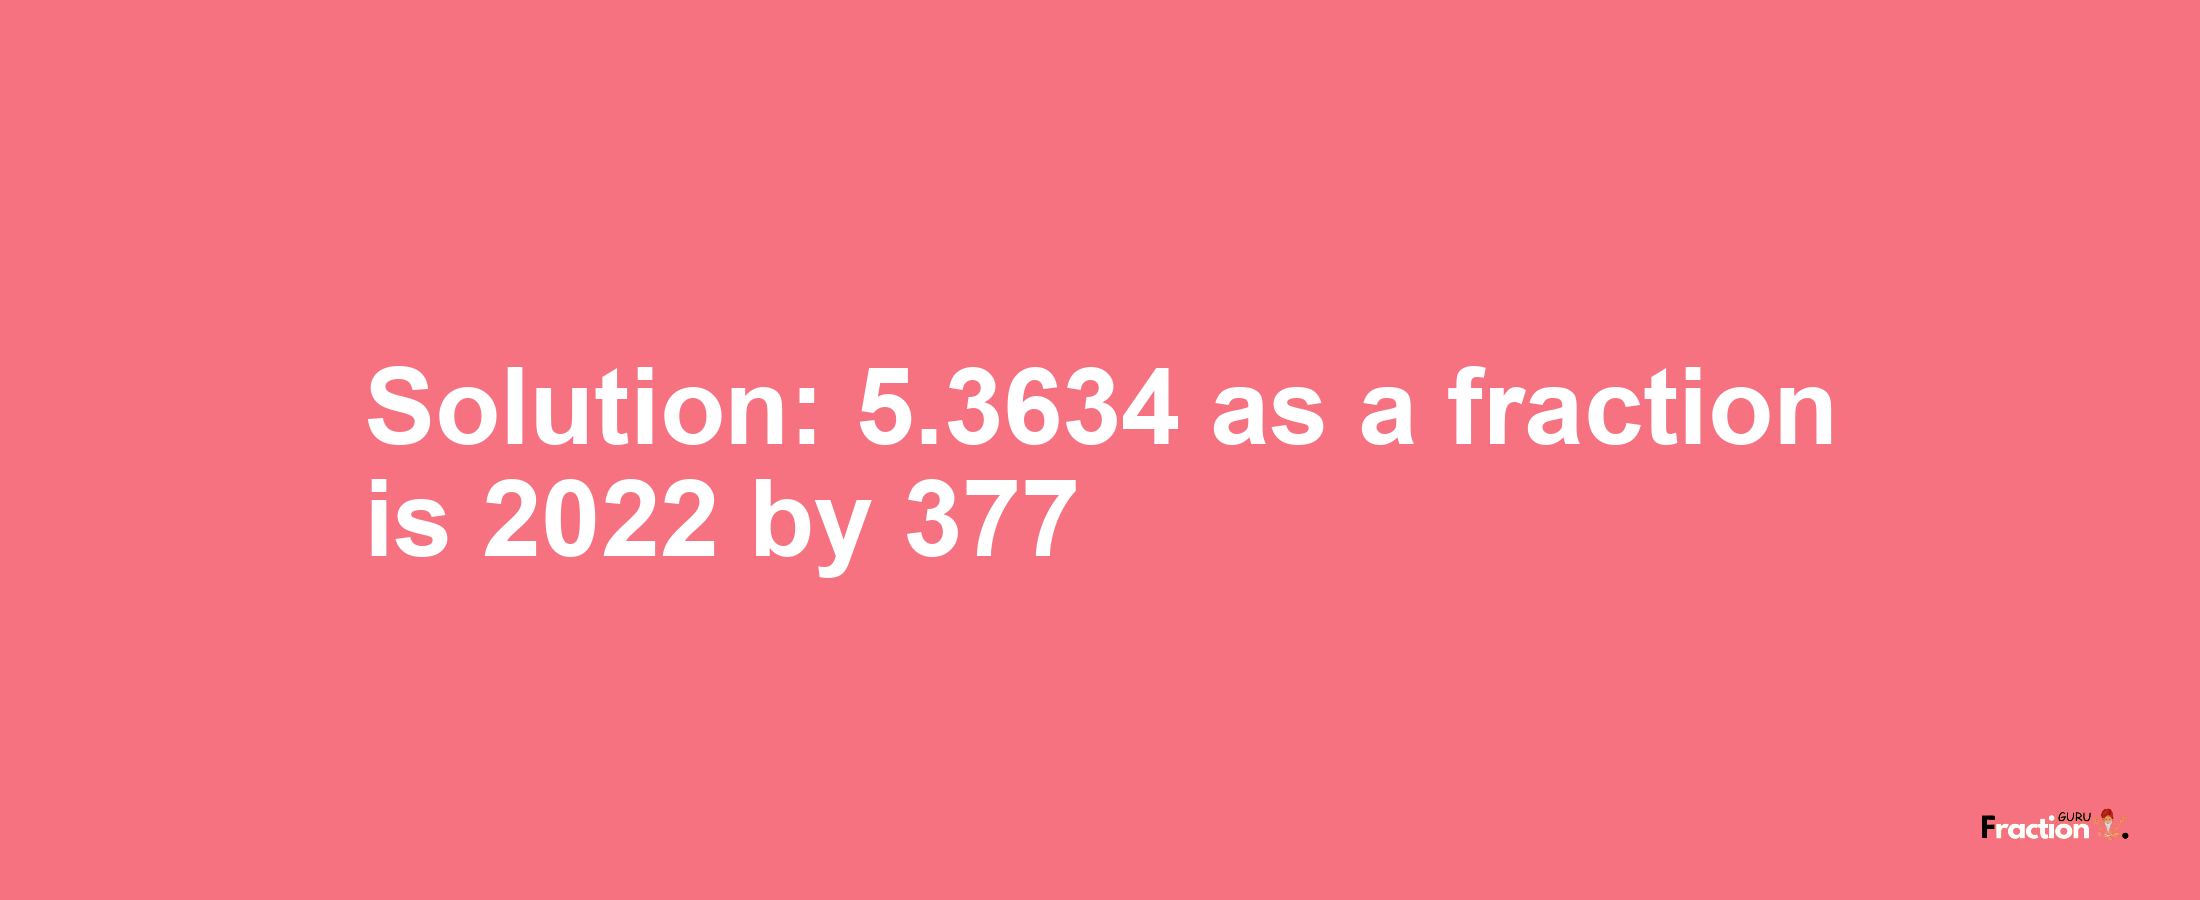 Solution:5.3634 as a fraction is 2022/377